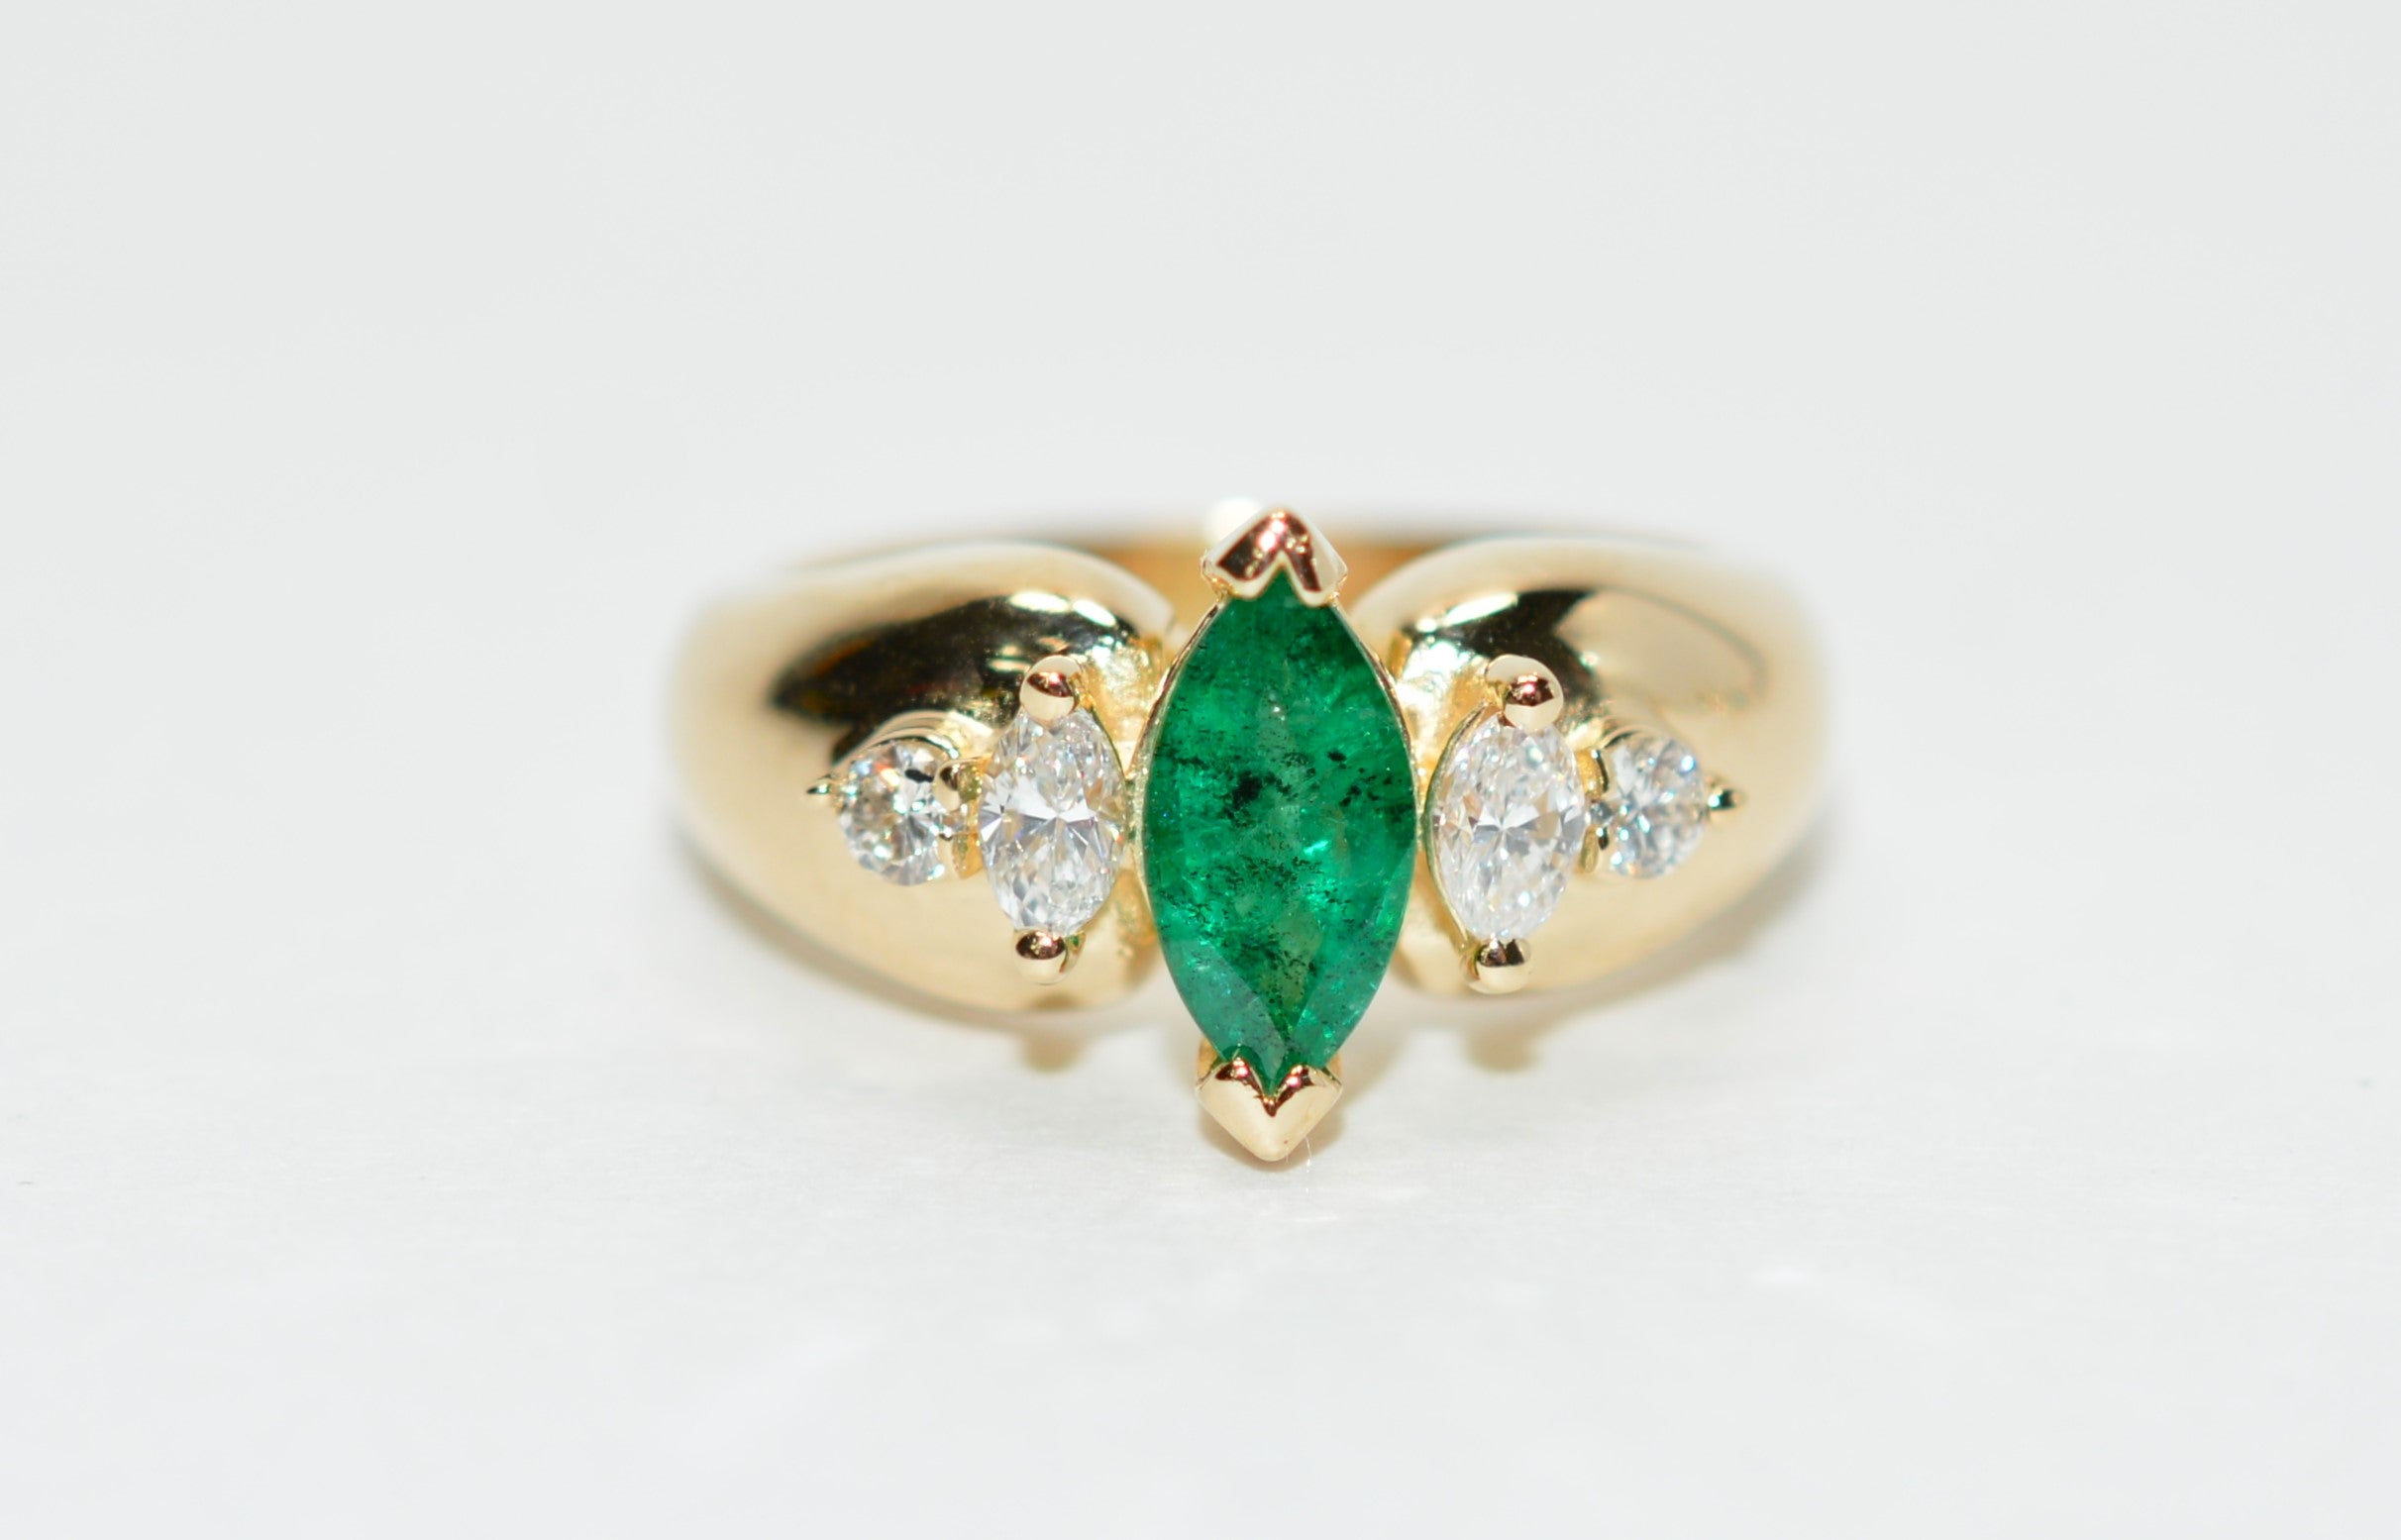 Natural Emerald & Diamond Ring 14K Solid Gold .95tcw May Birthstone Ring Green Marquise Gemstone Ring Vintage Jewellery Estate Jewelry